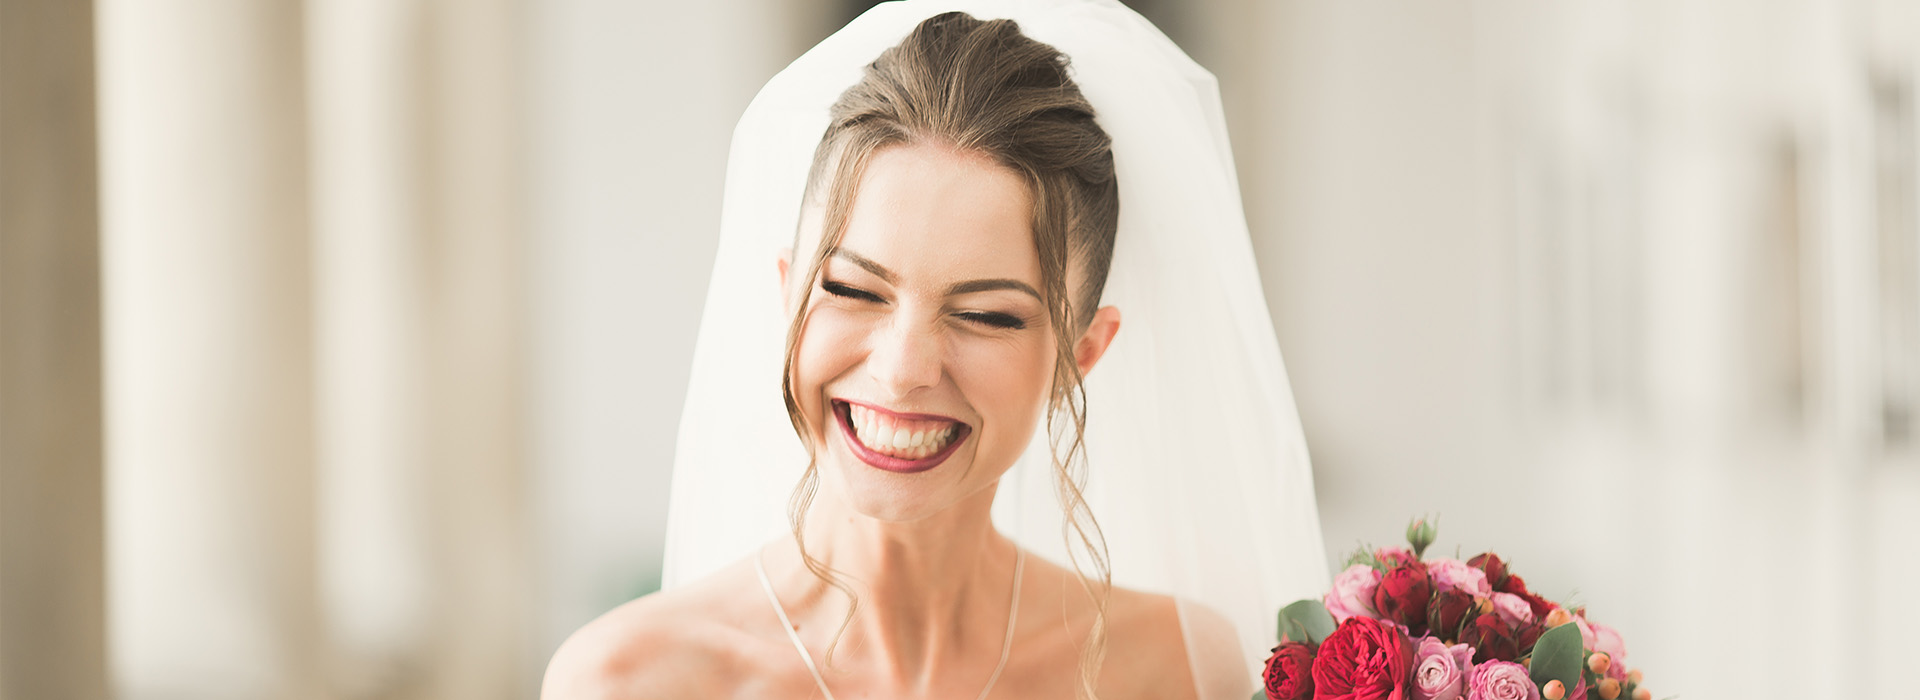 The image features a bride in wedding attire, smiling and looking towards the camera.